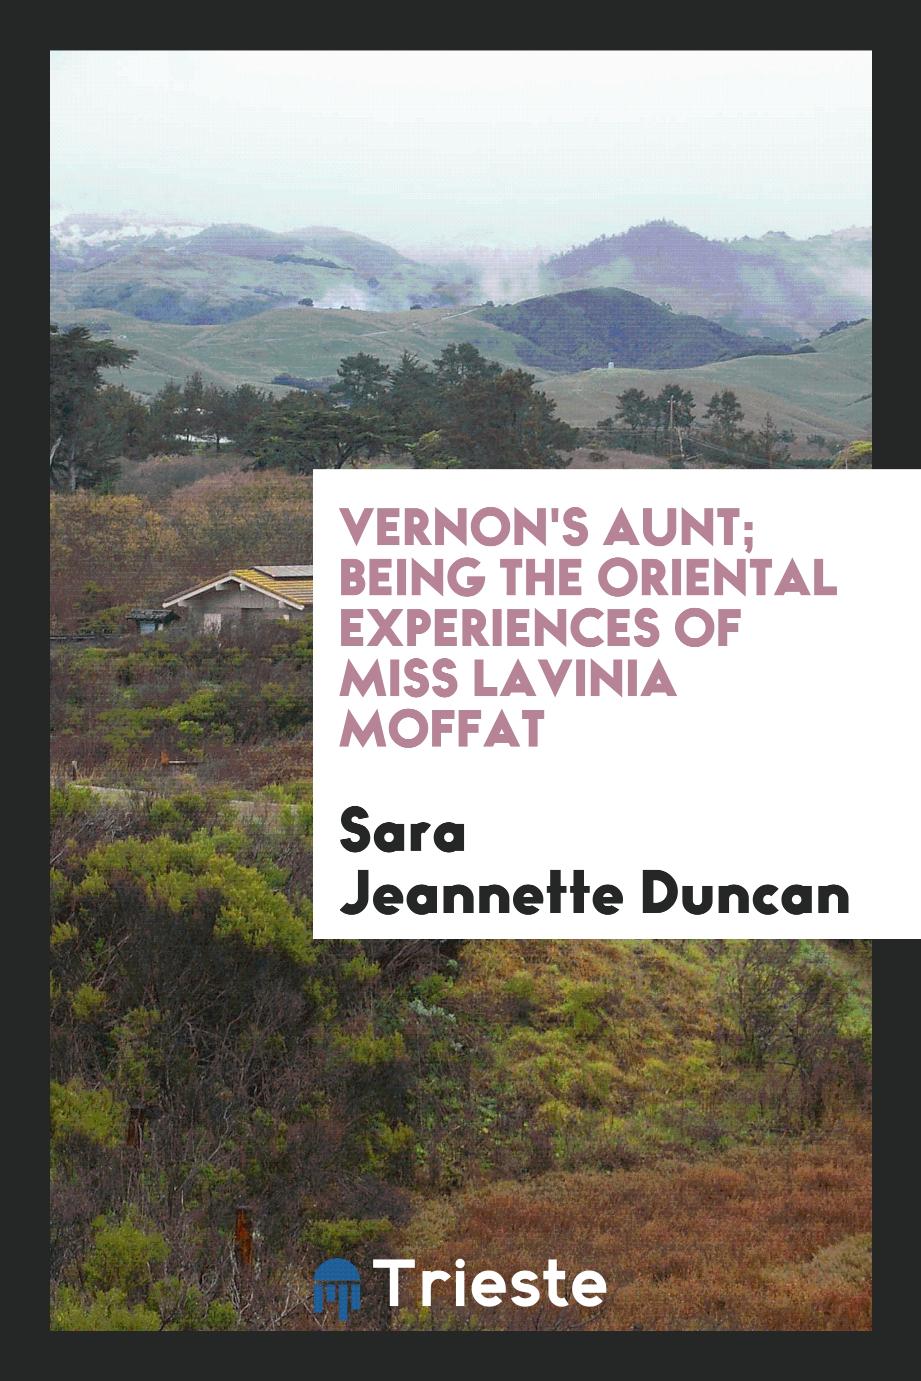 Vernon's aunt; being the Oriental experiences of Miss Lavinia Moffat